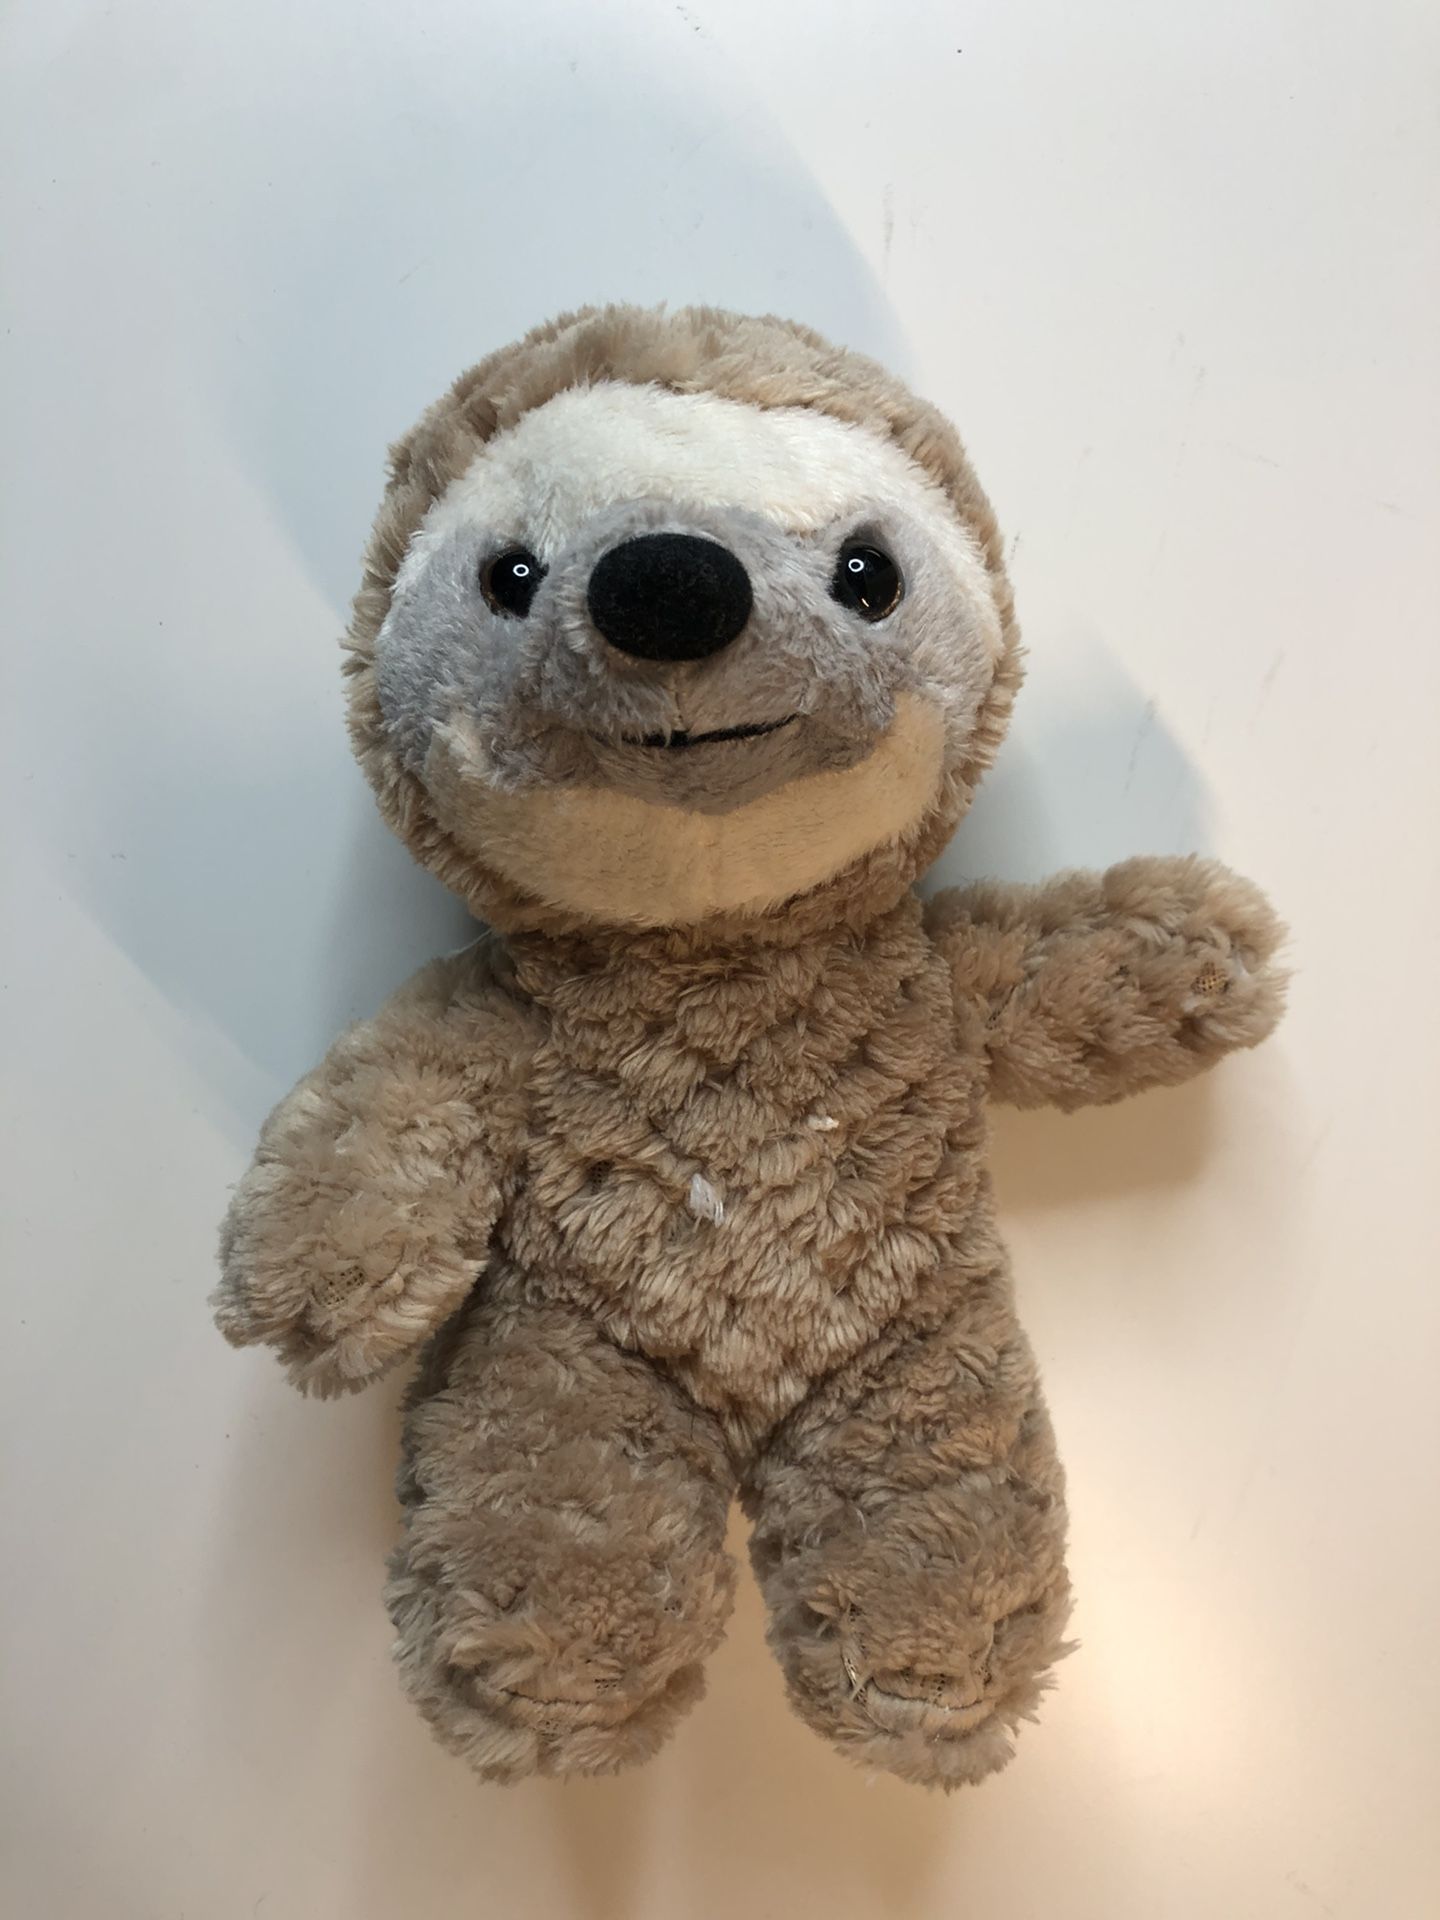 Sloth plushie (trying to get rid of ASAP)